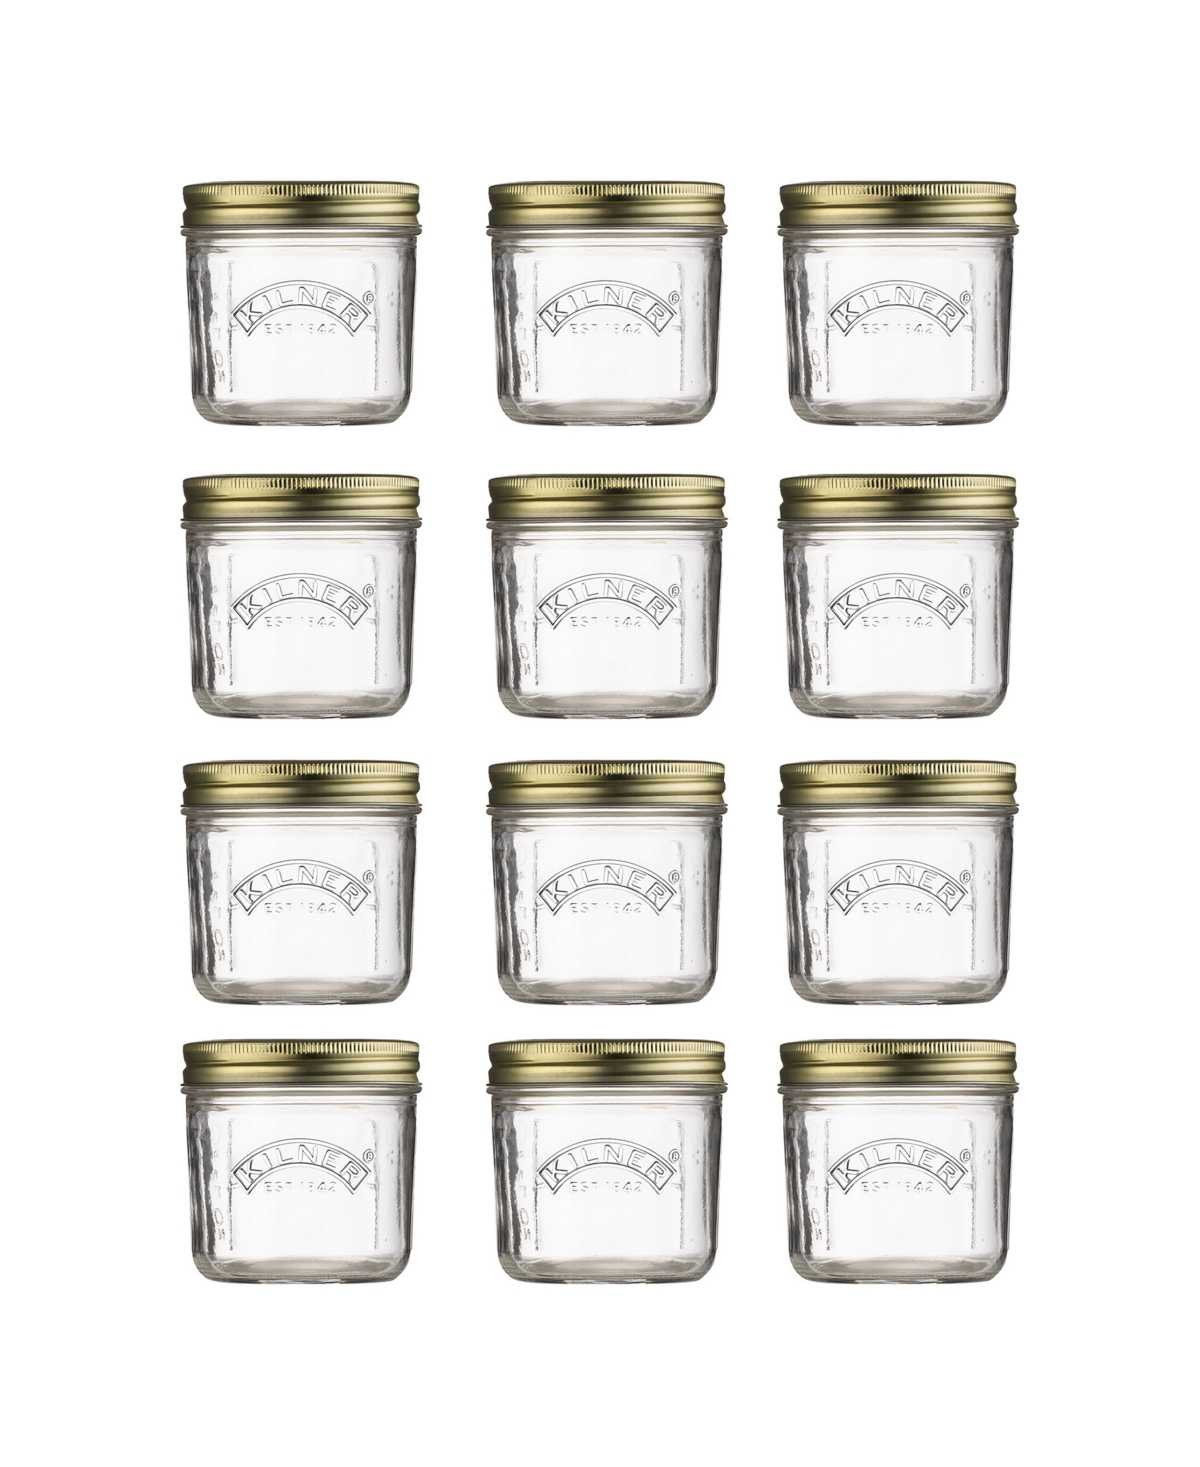 Wide Mouth Canning Jar 7 oz, Set of 12 - Clear